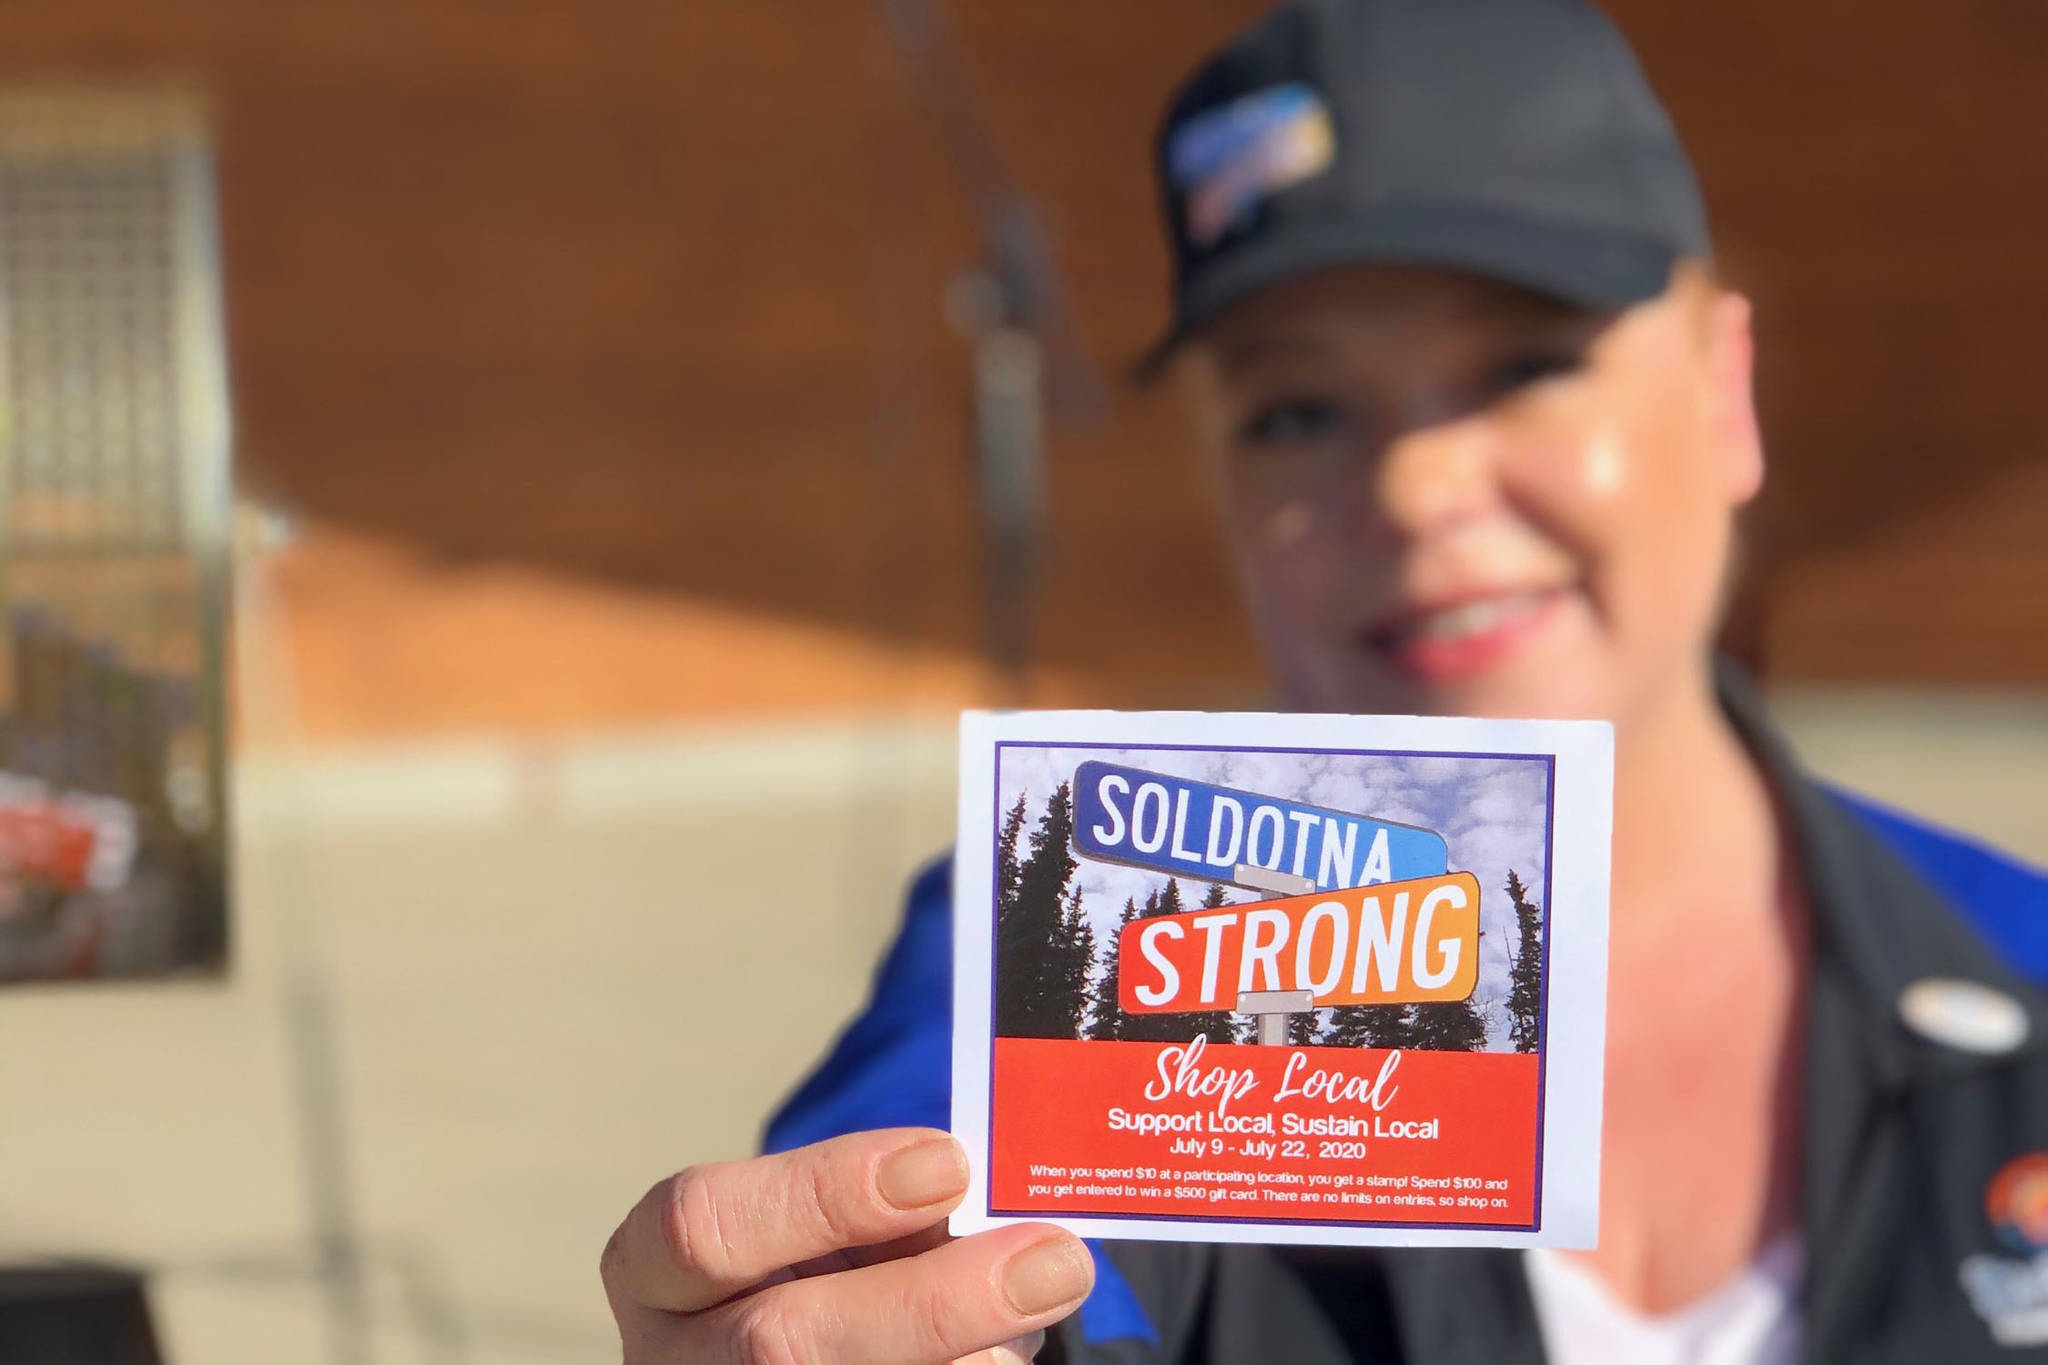 Shanon Davis, executive director of the Soldotna Chamber of Commerce, shows off a stamp card used in the Chamber’s Soldotna Strong Shop Local campaign on July 22, 2020. The City of Kenai is considering launching its own shop local program. (Photo courtesy Shanon Davis)